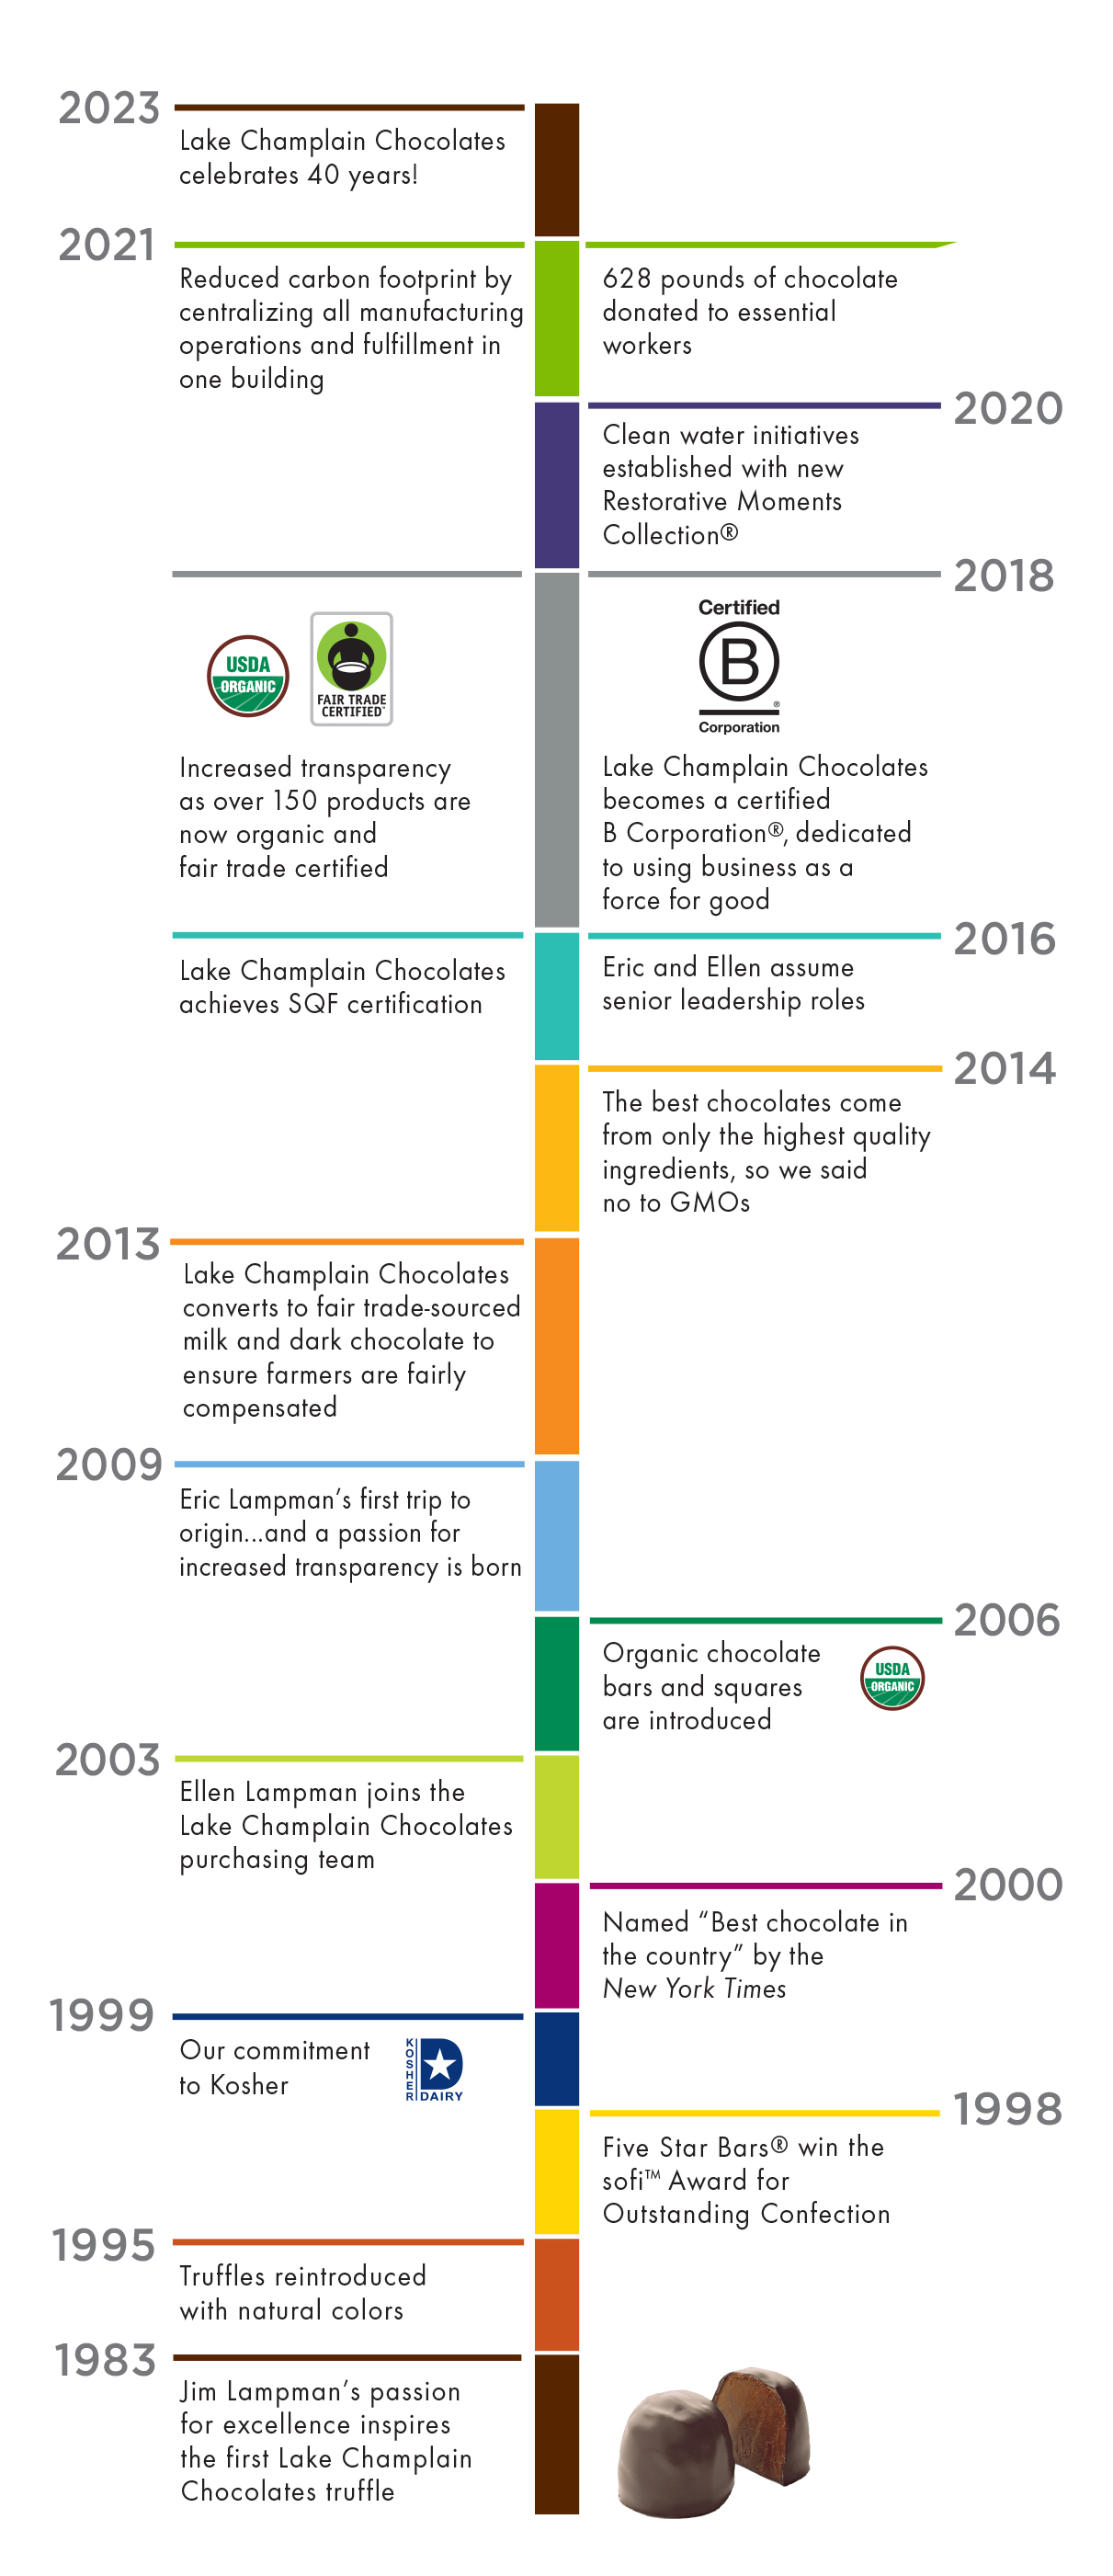 The Lake Champlain Chocolates timeline of historical events